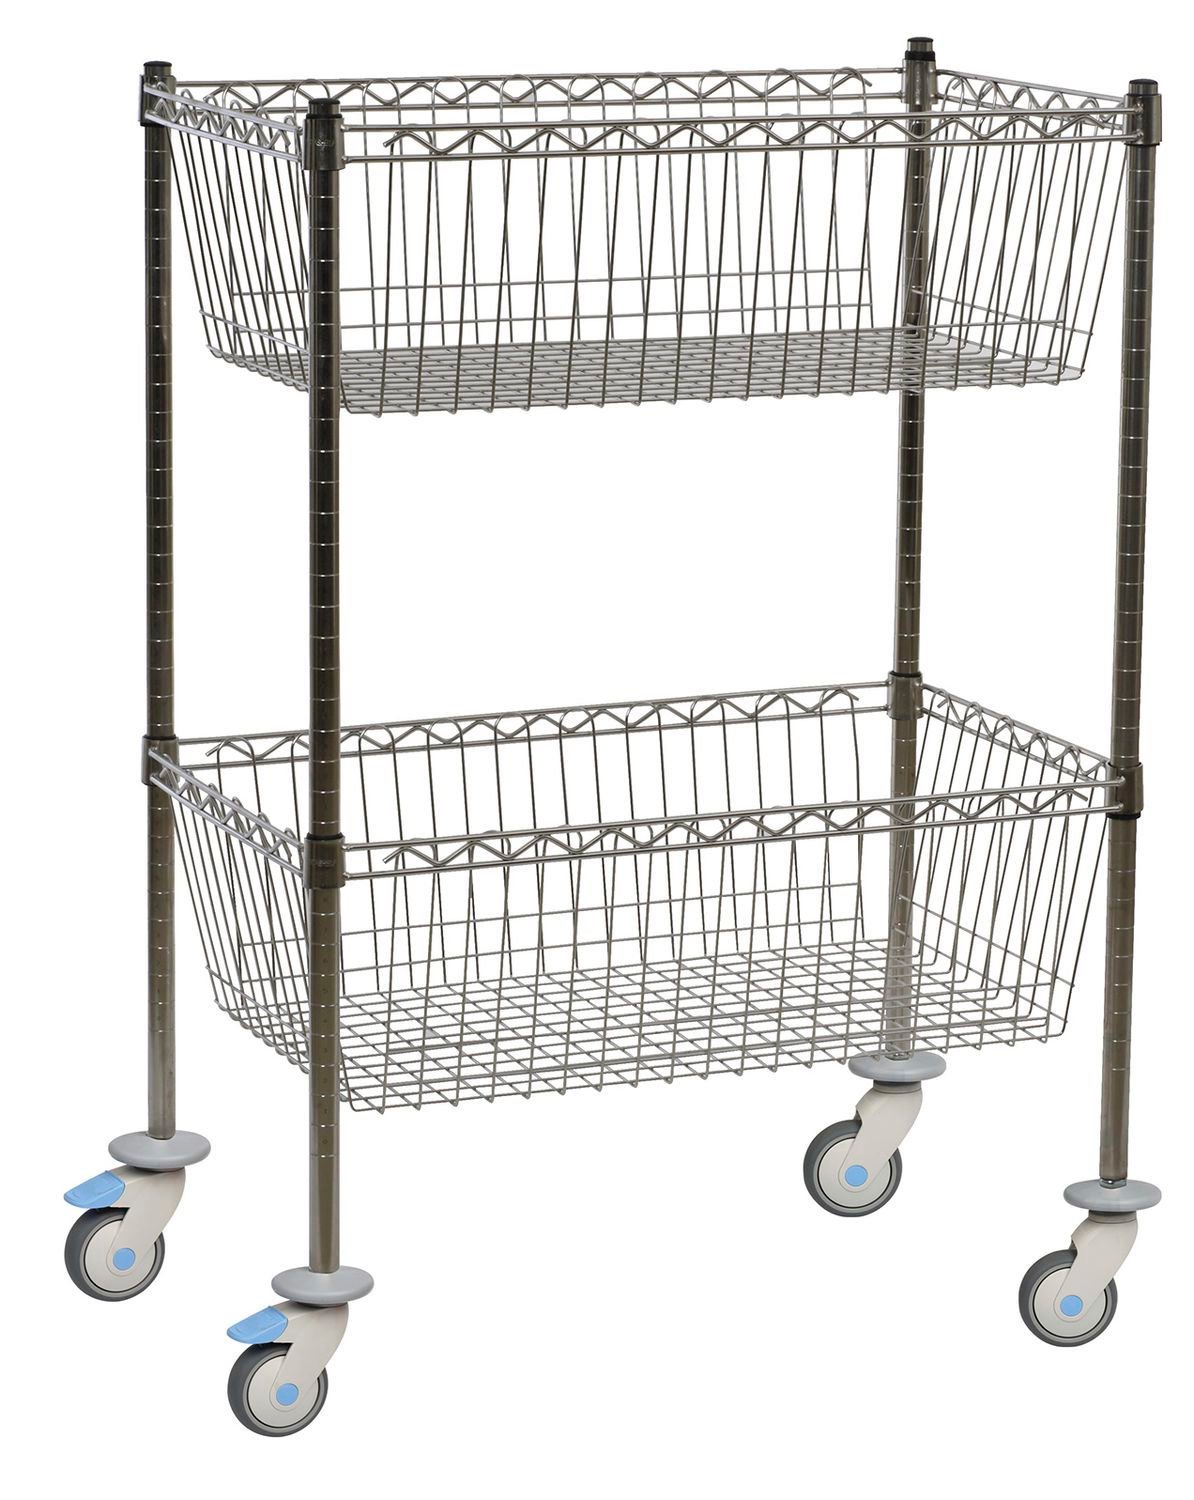 Transport trolley / with basket / open-structure MSA 3350 MIXTA STAINLESS STEEL HOSPITAL EQUIPMENTS